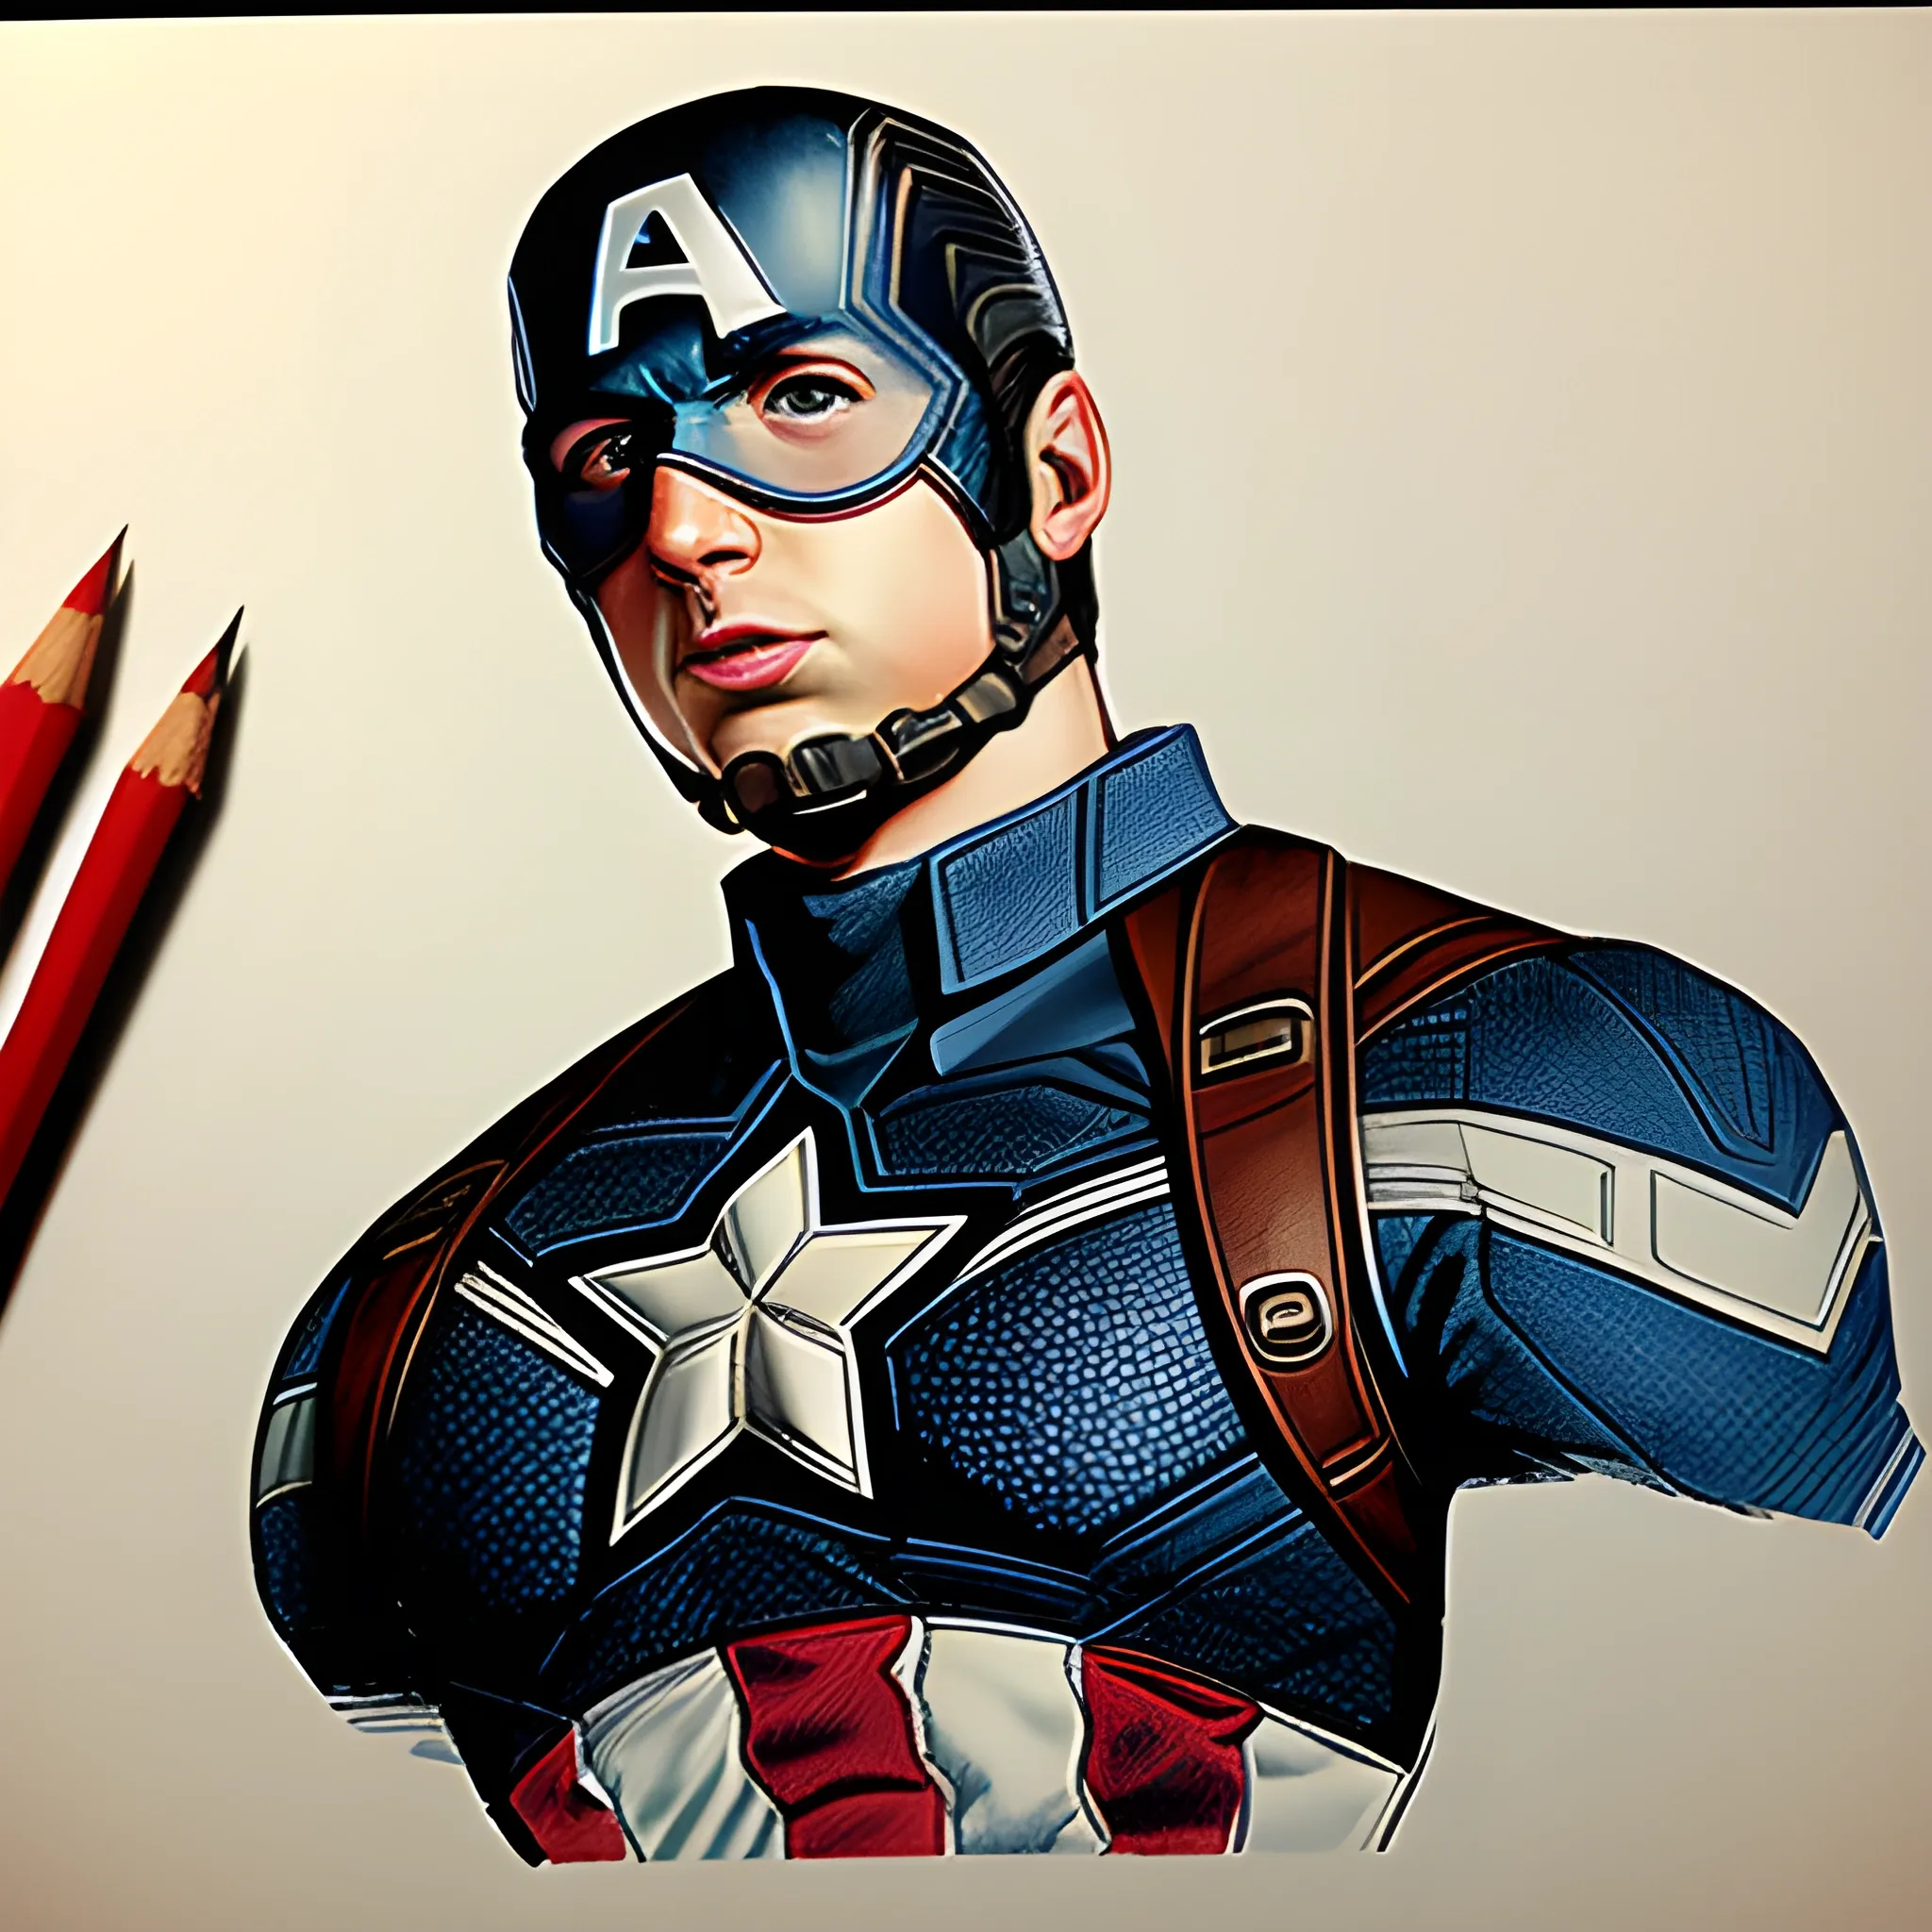 How to draw: Captain America - easy step by step tutorial for kids